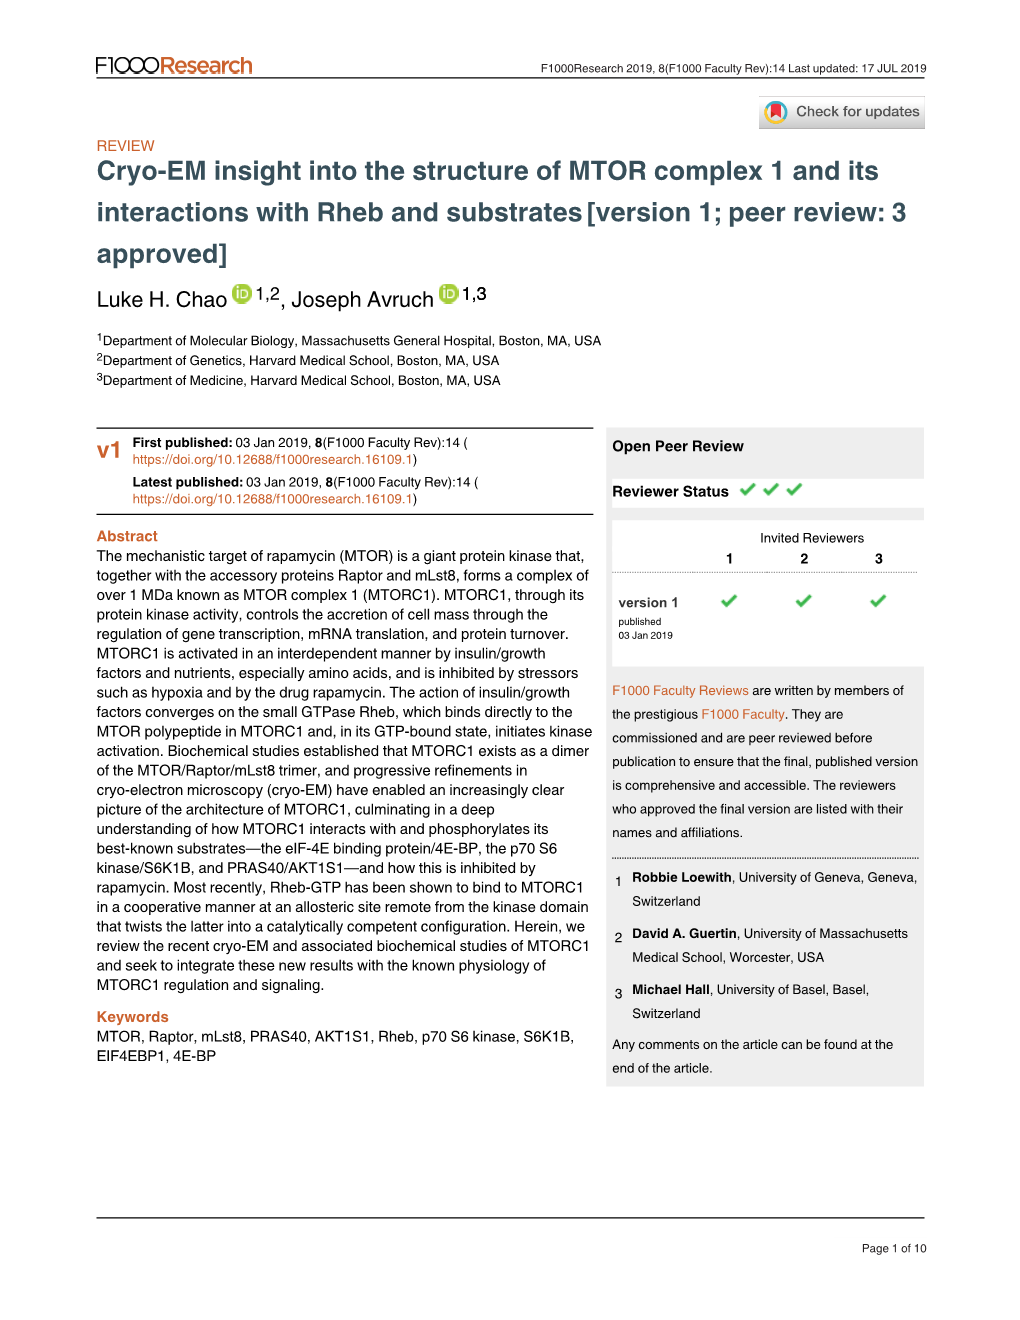 Cryo-EM Insight Into the Structure of MTOR Complex 1 and Its Interactions with Rheb and Substrates [Version 1; Peer Review: 3 Approved] Luke H